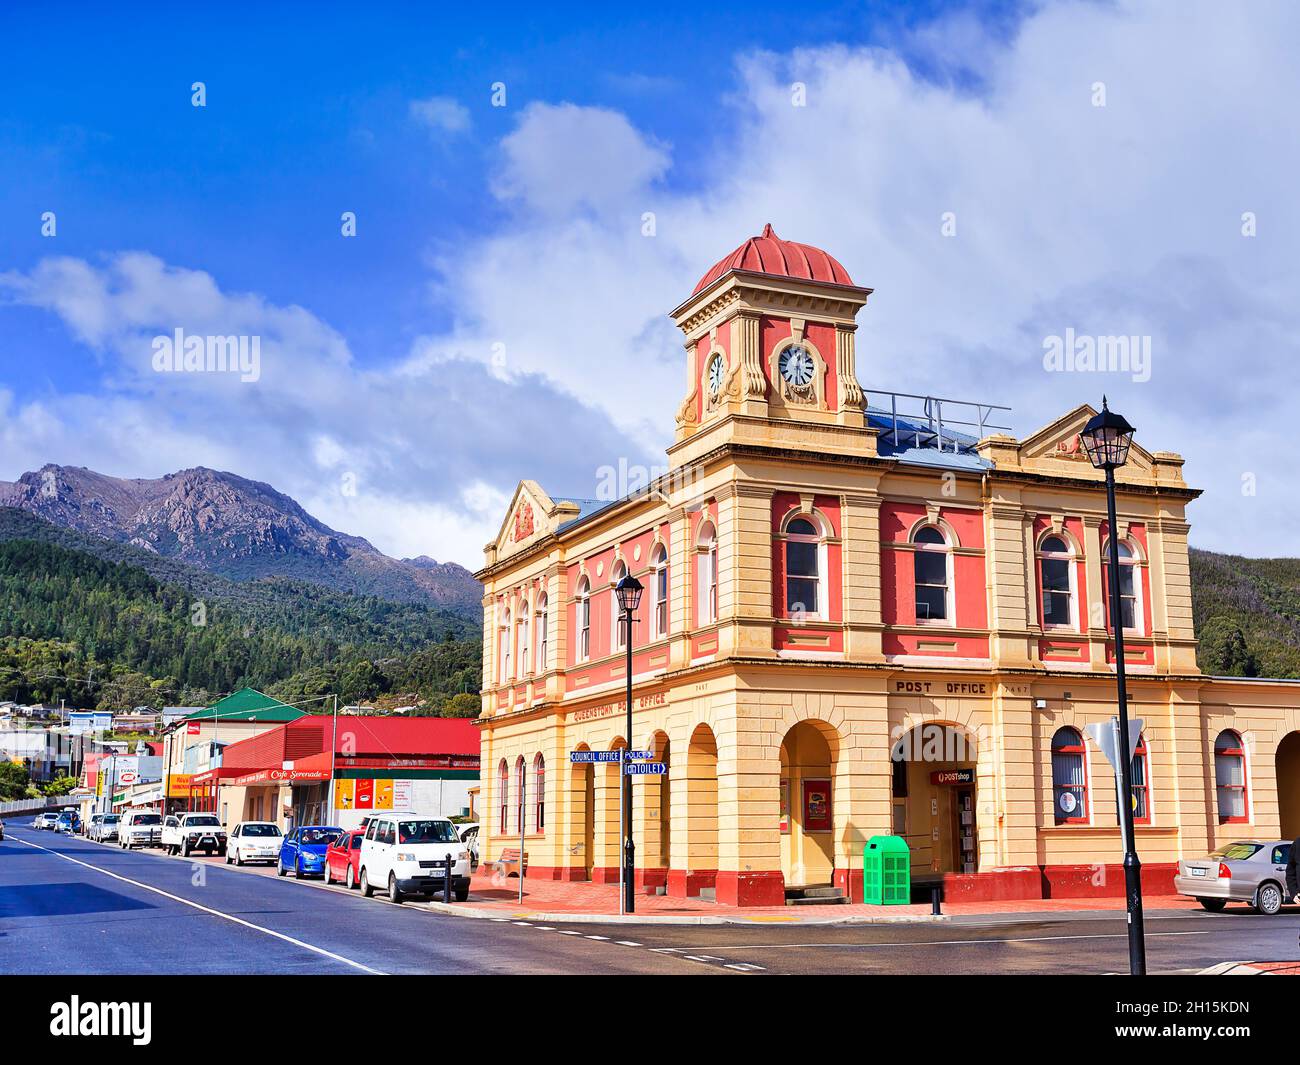 Queenstown, Australia - 24 April 2014: Historic pos office building on the main street of old rural regional town Queenstown in West Coast council of Stock Photo